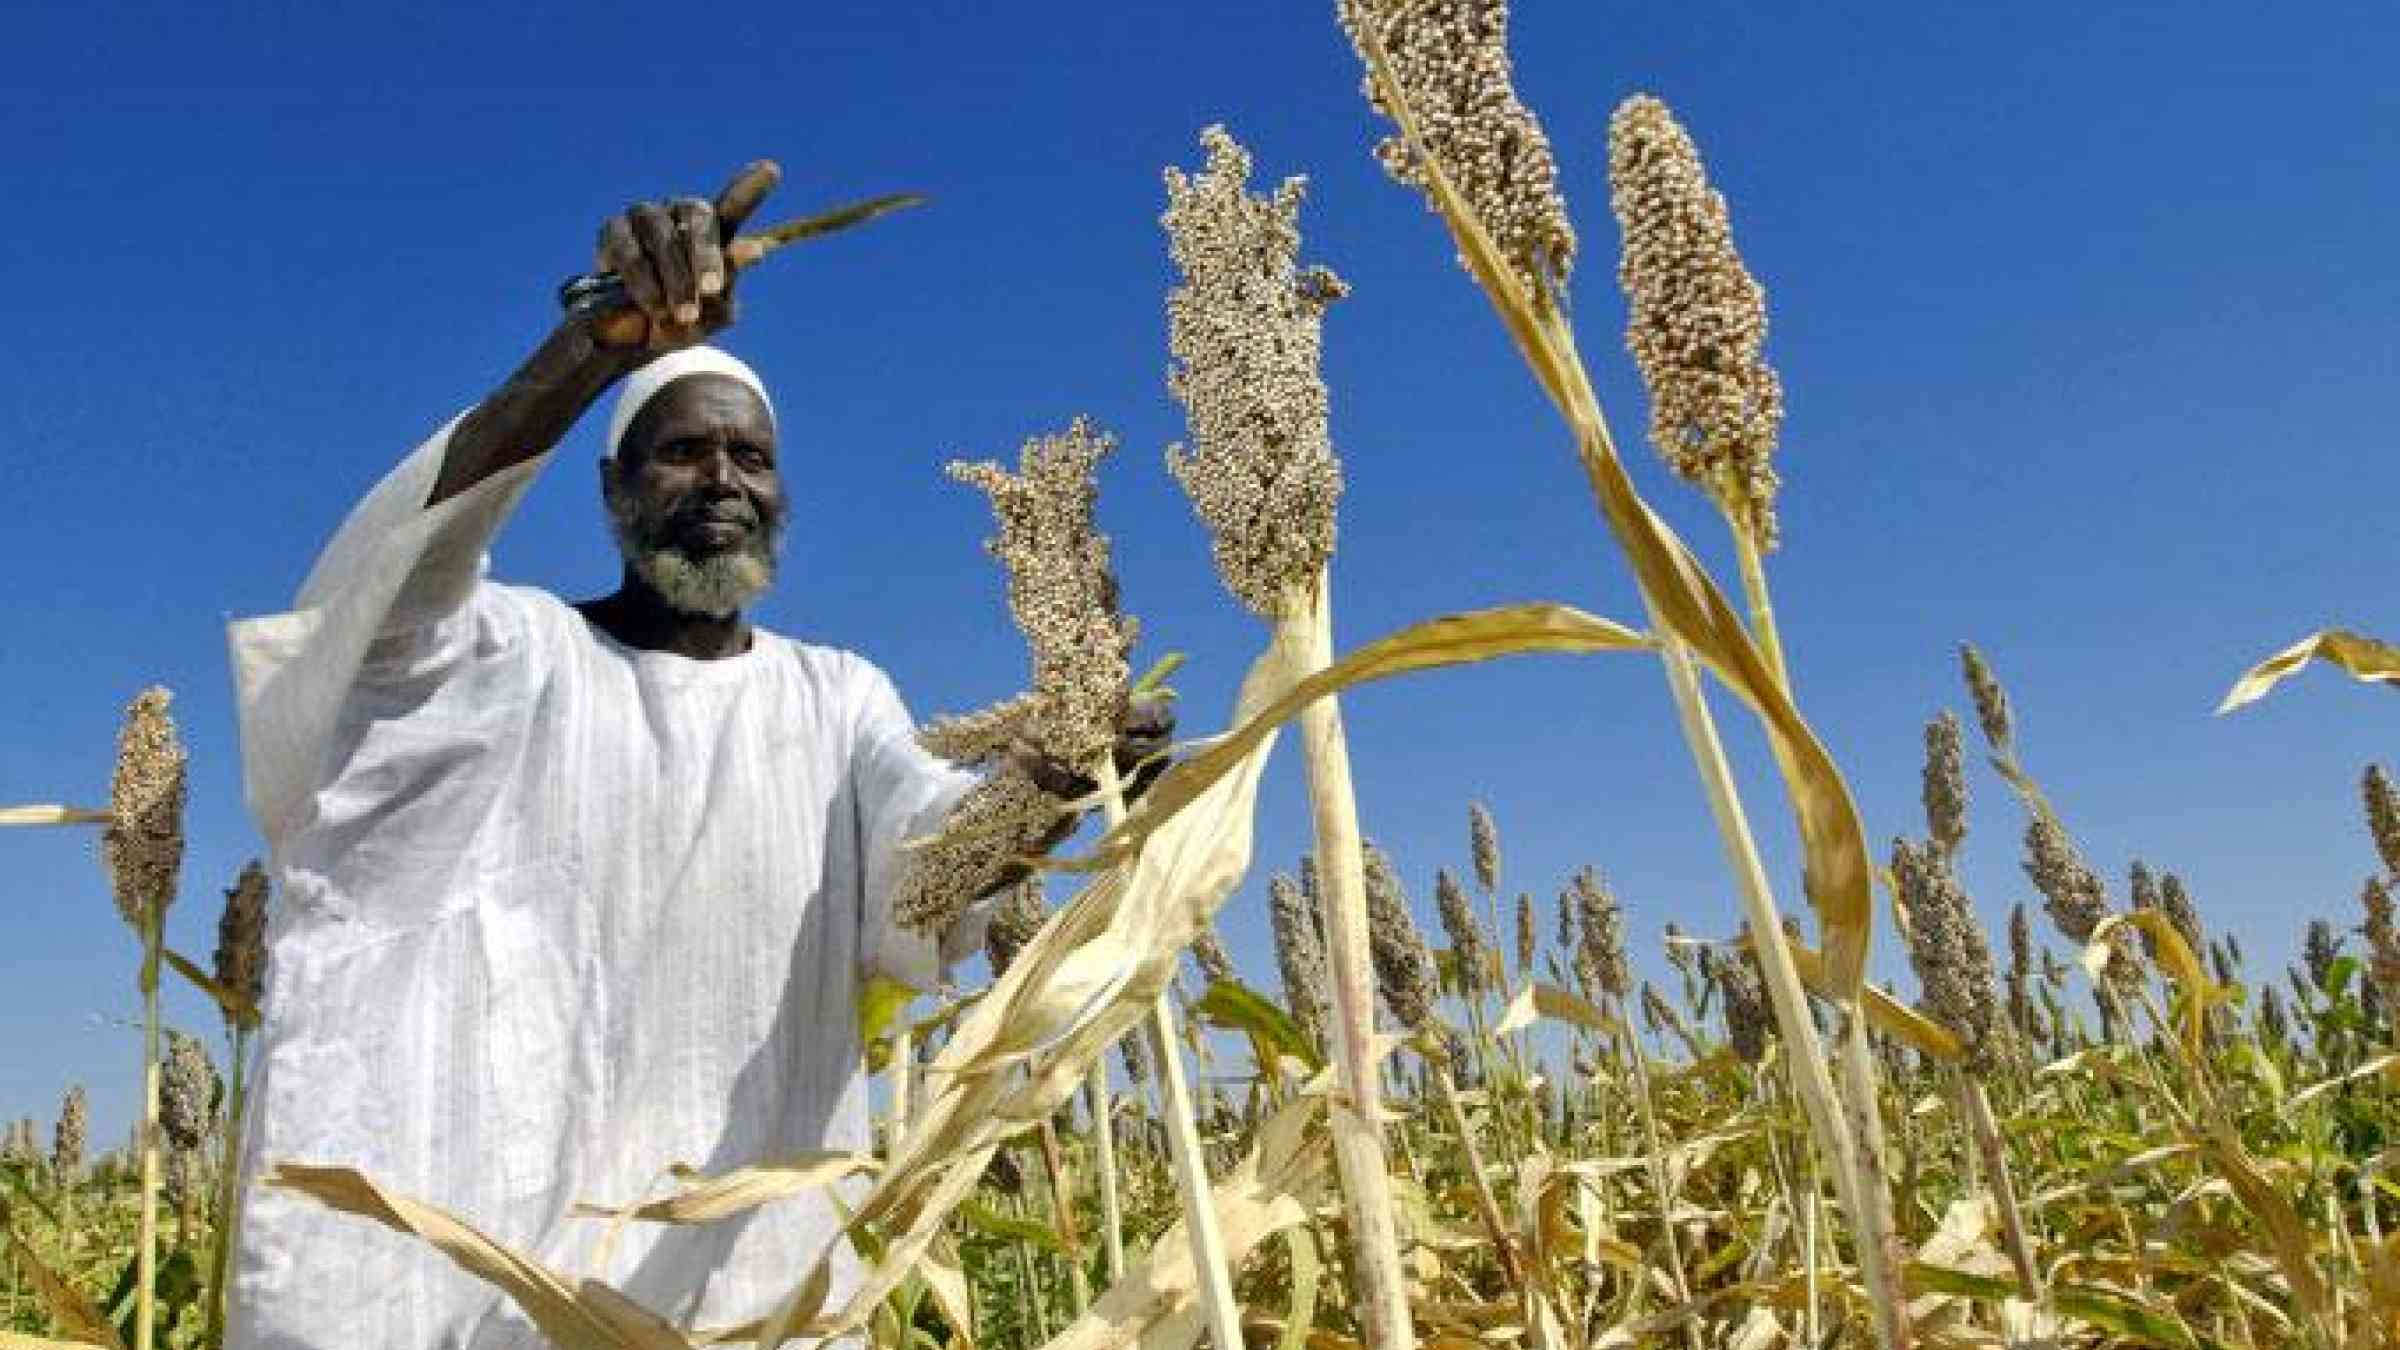 Farmer Harvests Sorghum Seeds in Sudan. UN Photo/Fred Noy